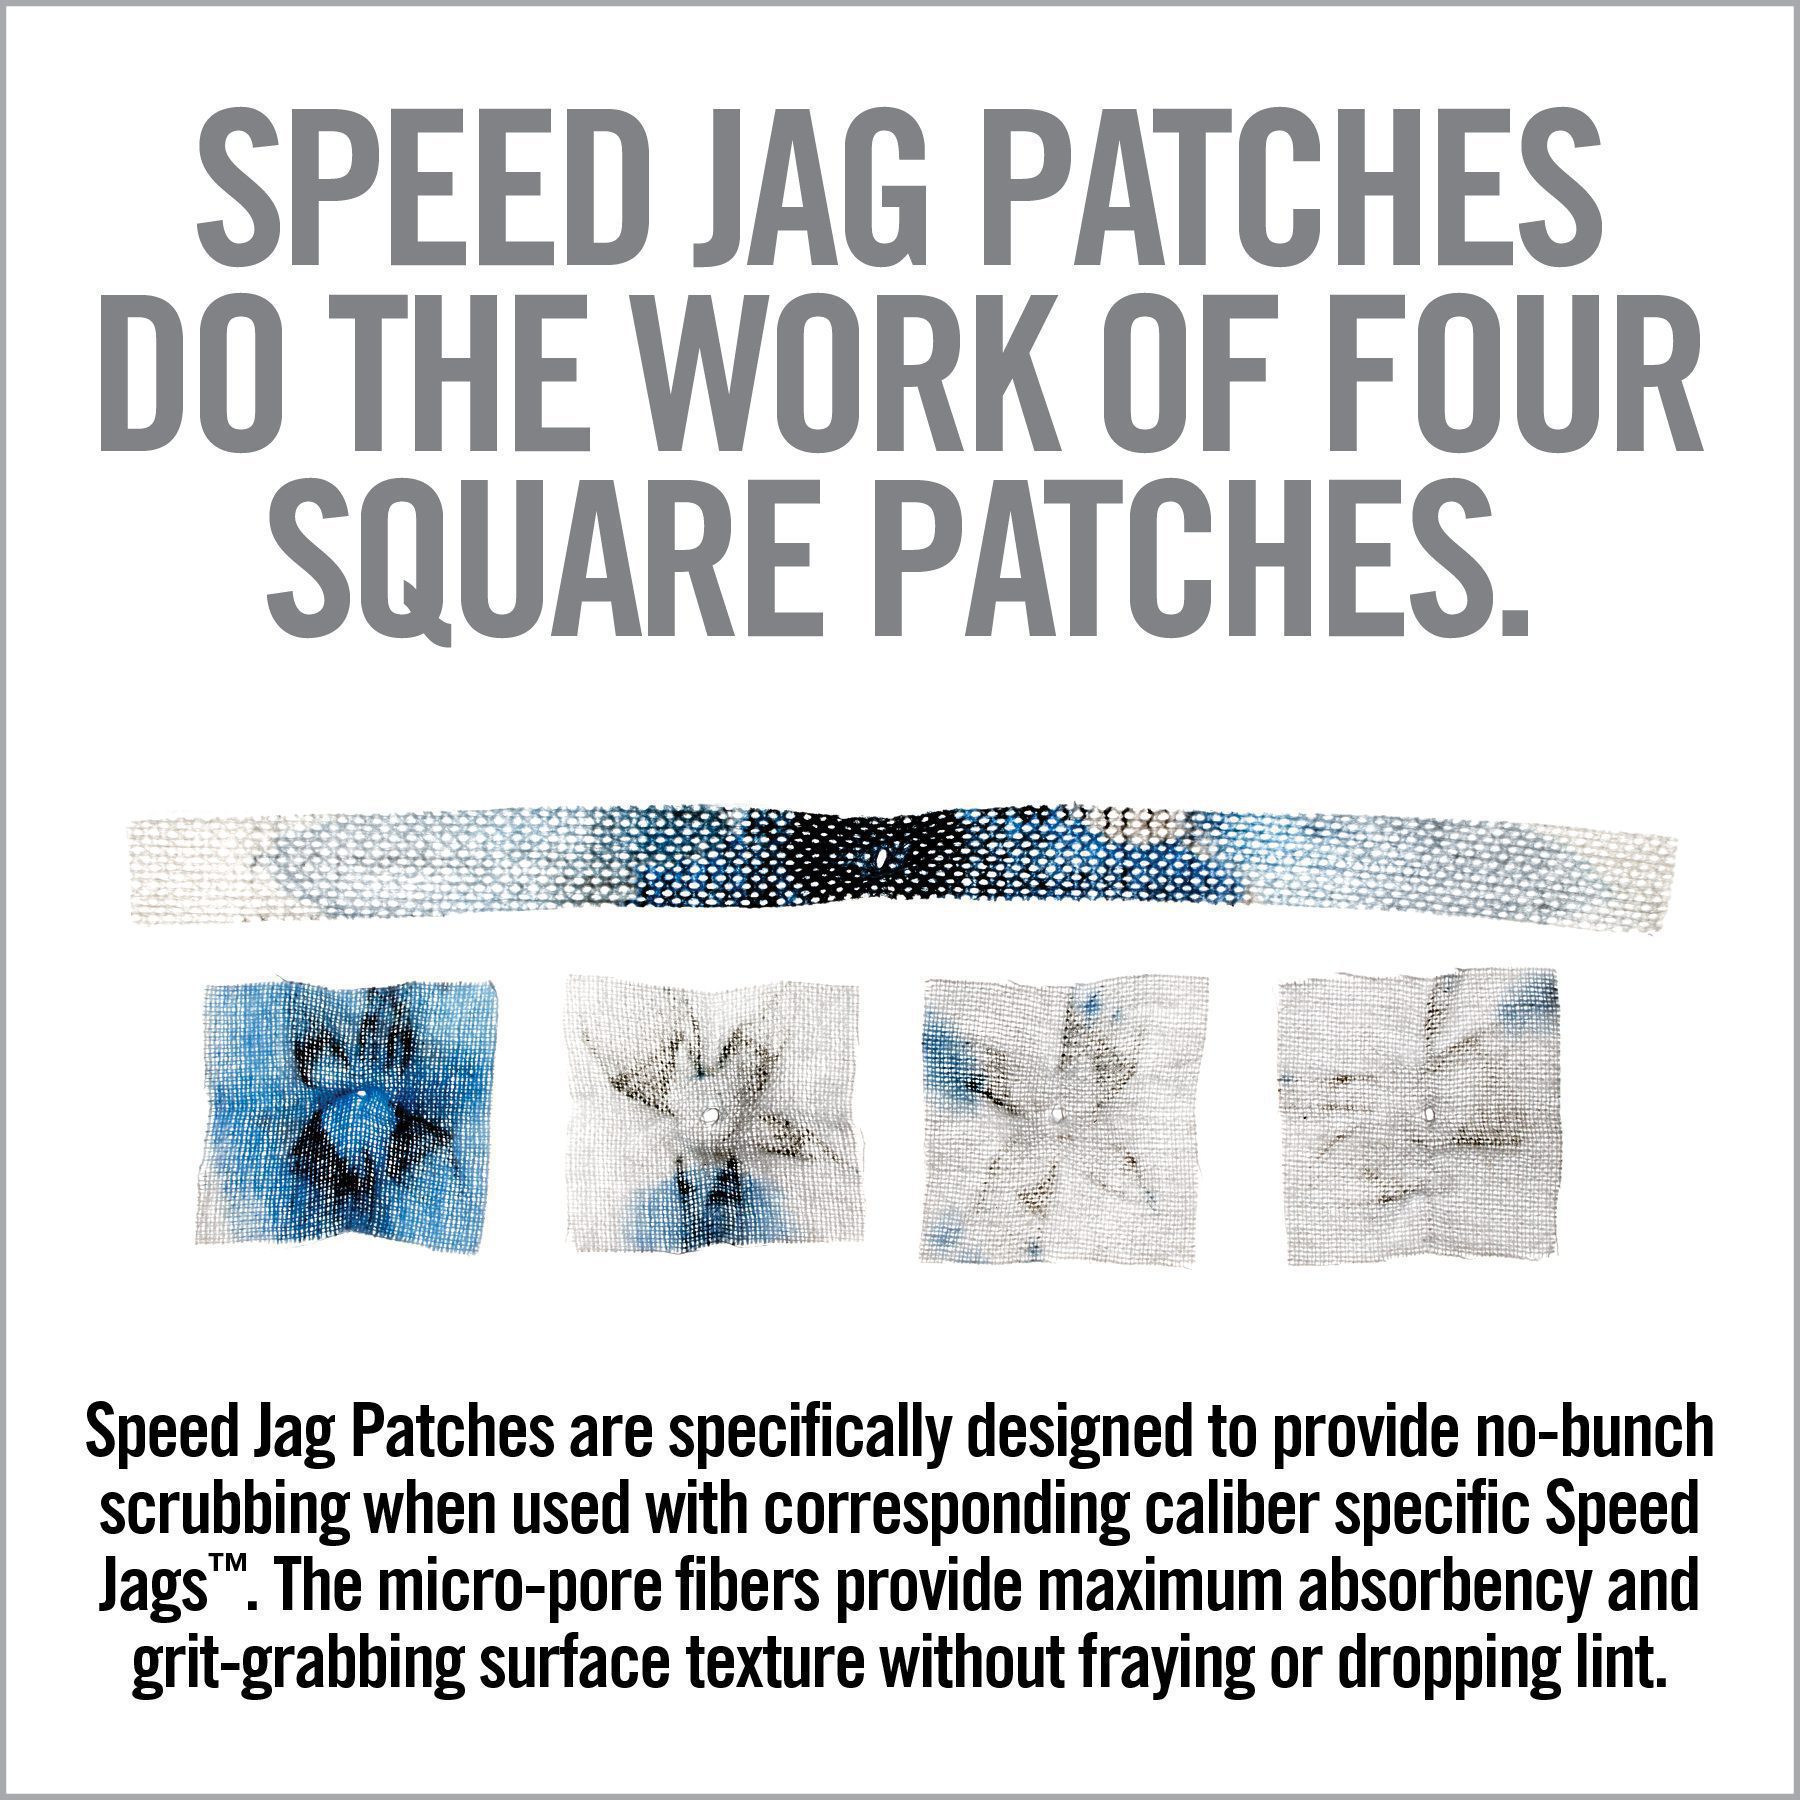 a poster with instructions on how to use square patches